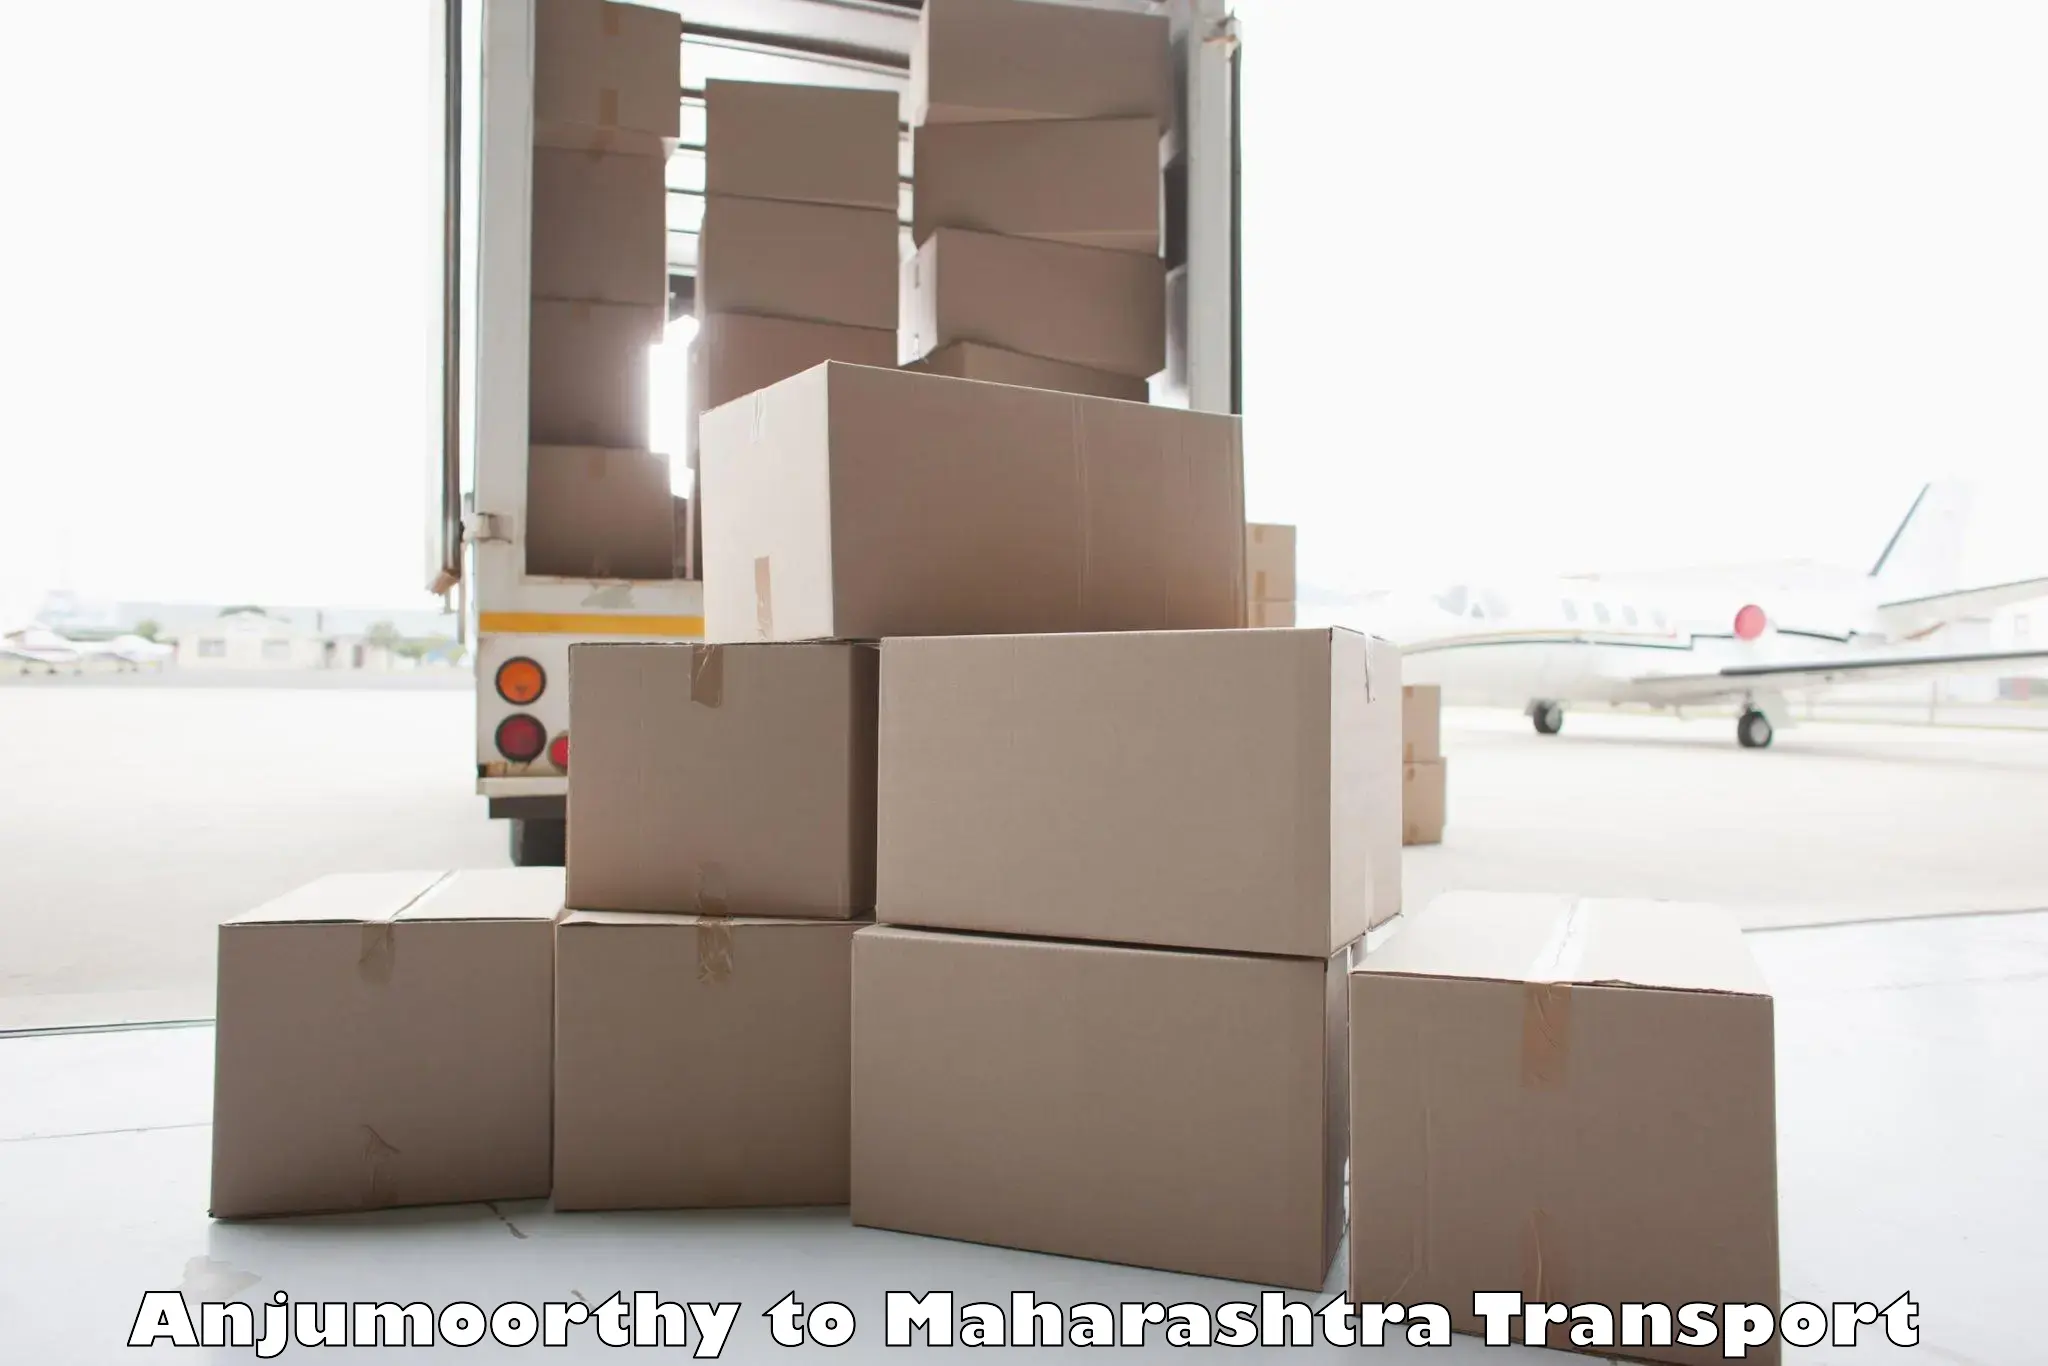 Online transport booking Anjumoorthy to Nanded